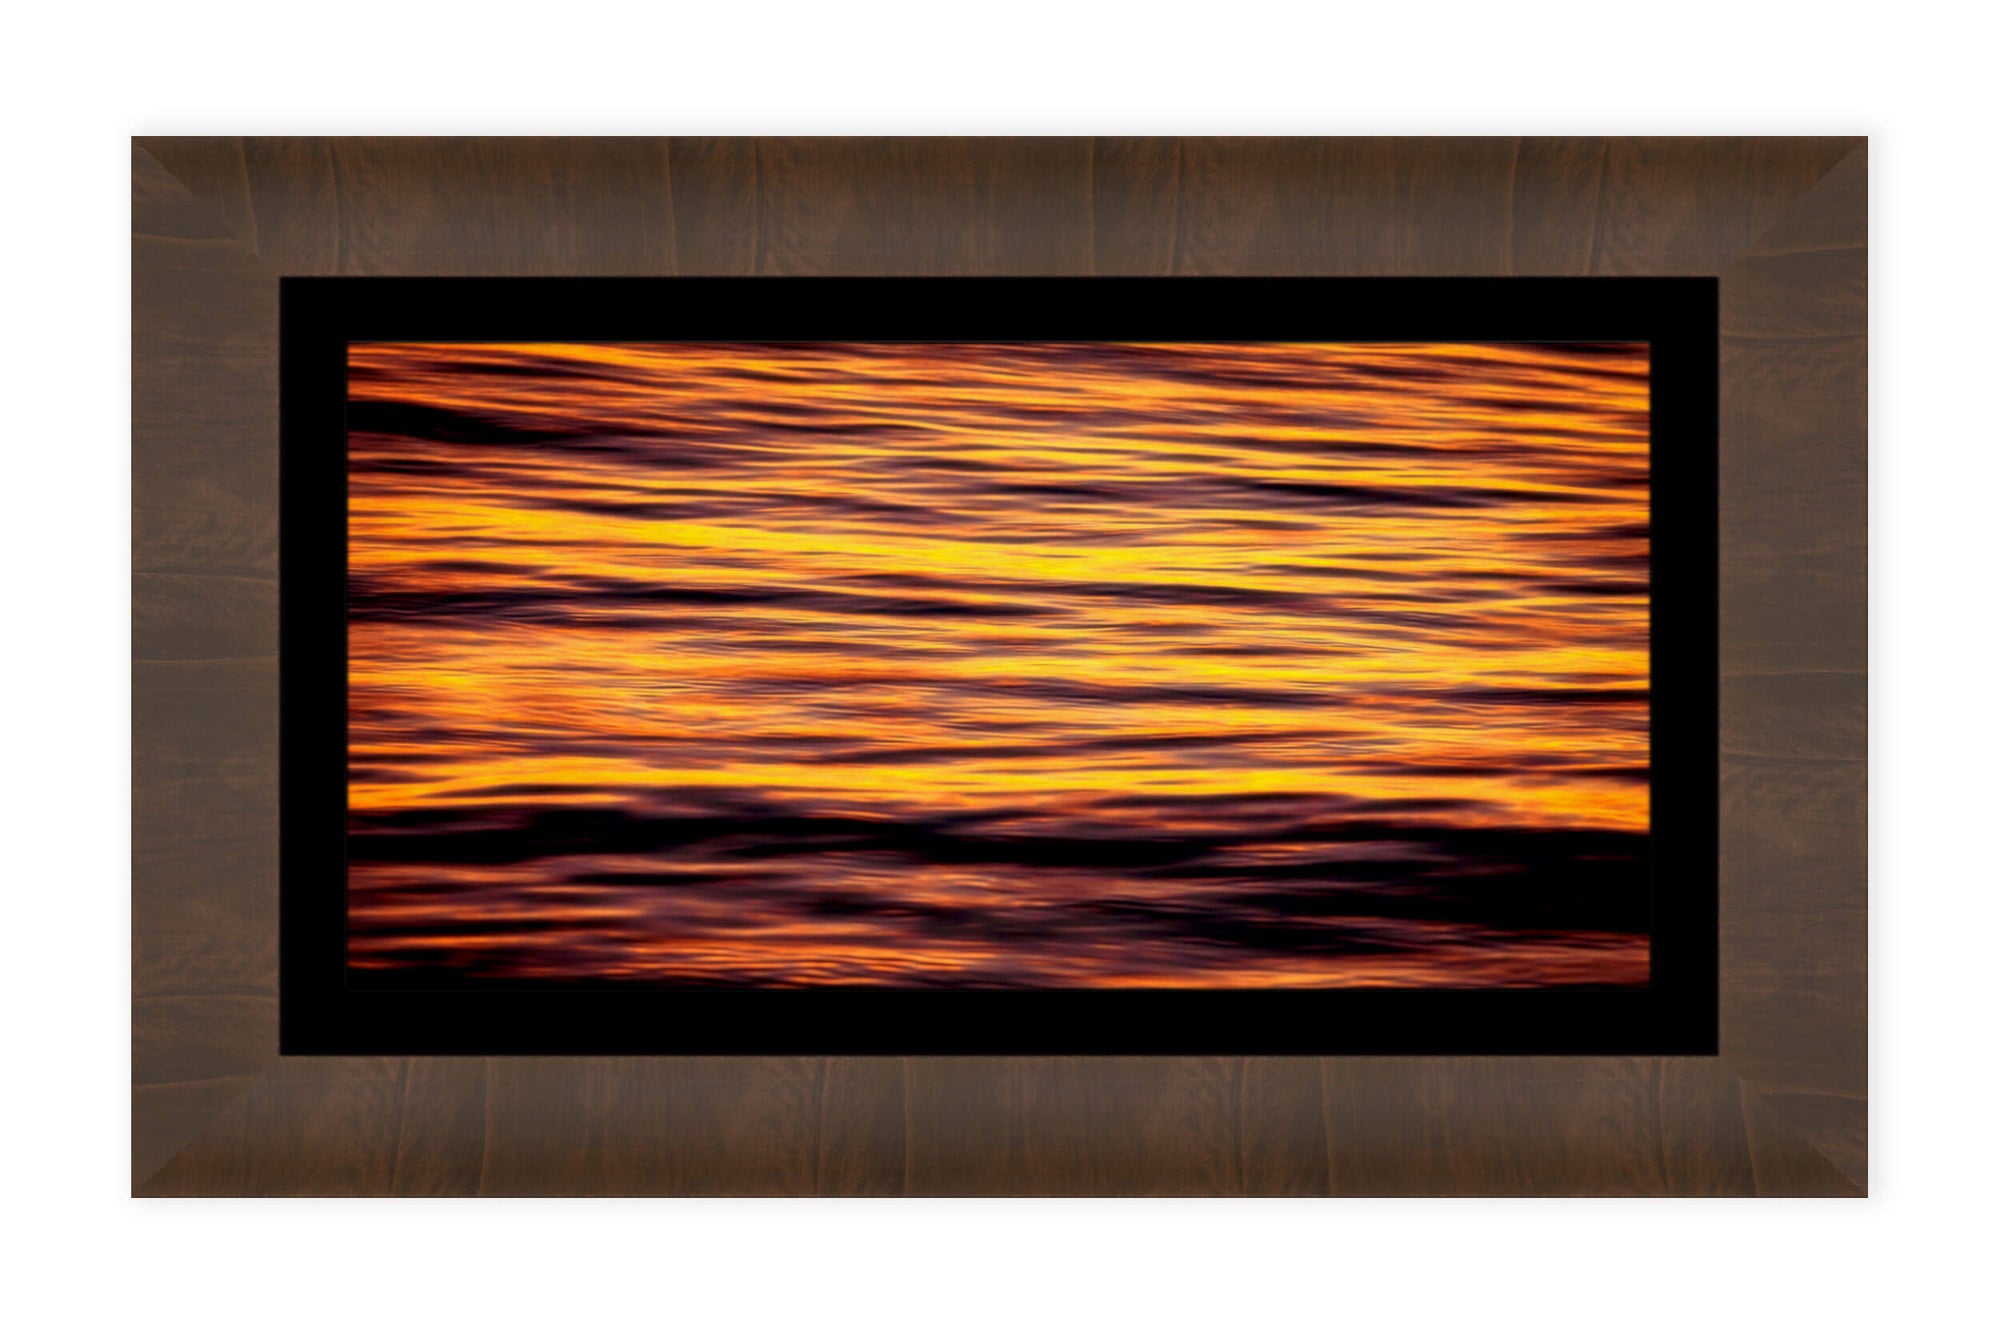 A framed sunset picture from Key West, Florida.